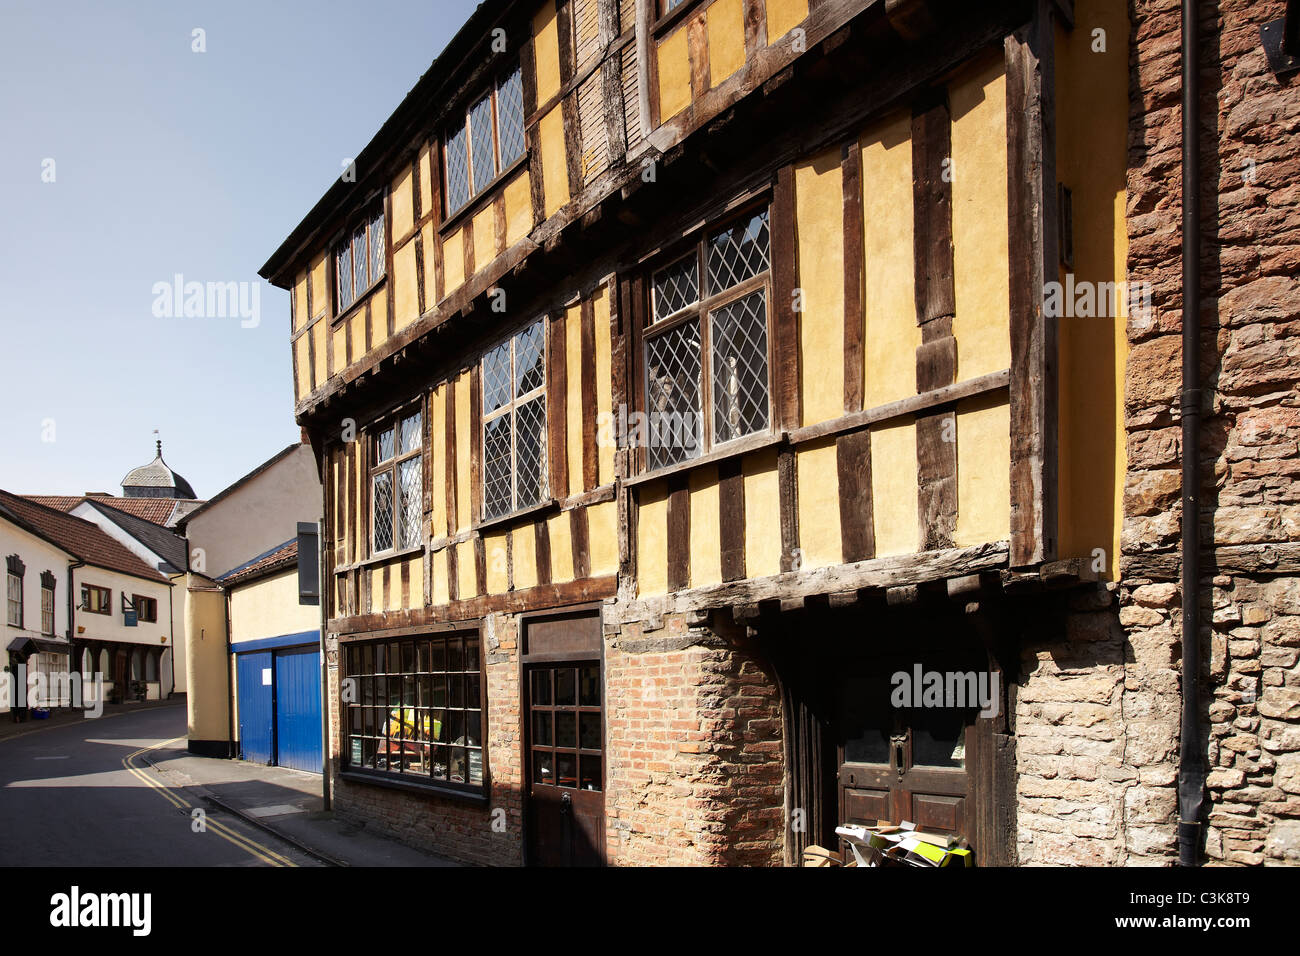 Half timbered house in Axminster, Somerset, England, UK Stock Photo